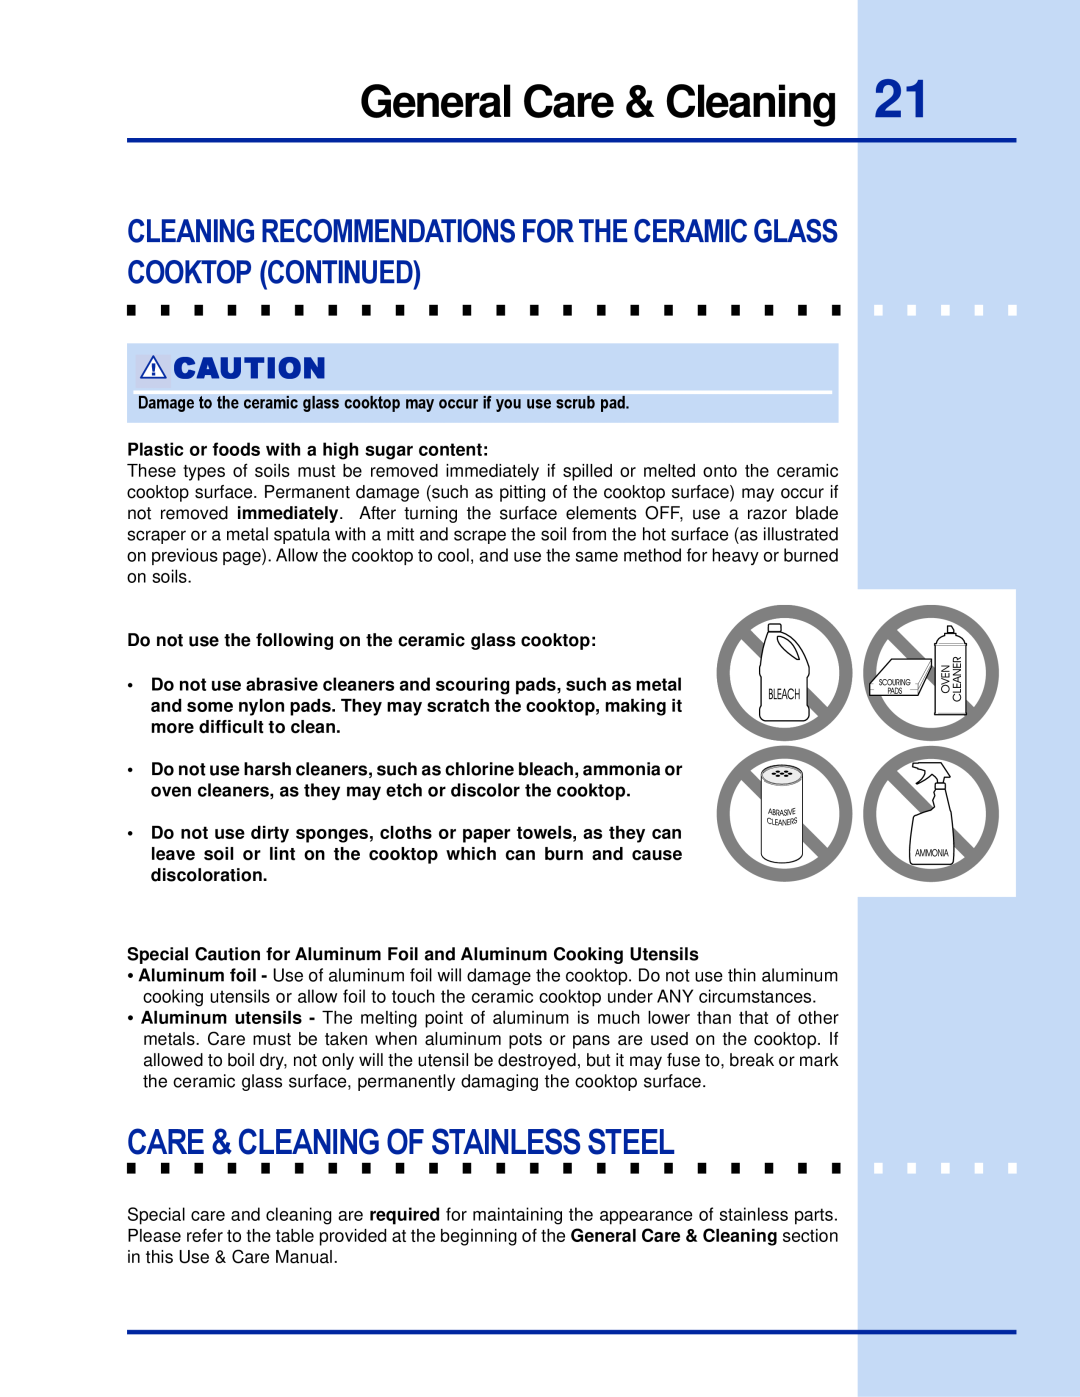 Electrolux 36 manual Care & Cleaning Of Stainless Steel, Cleaning Recommendations For The Ceramic Glass Cooktop Continued 